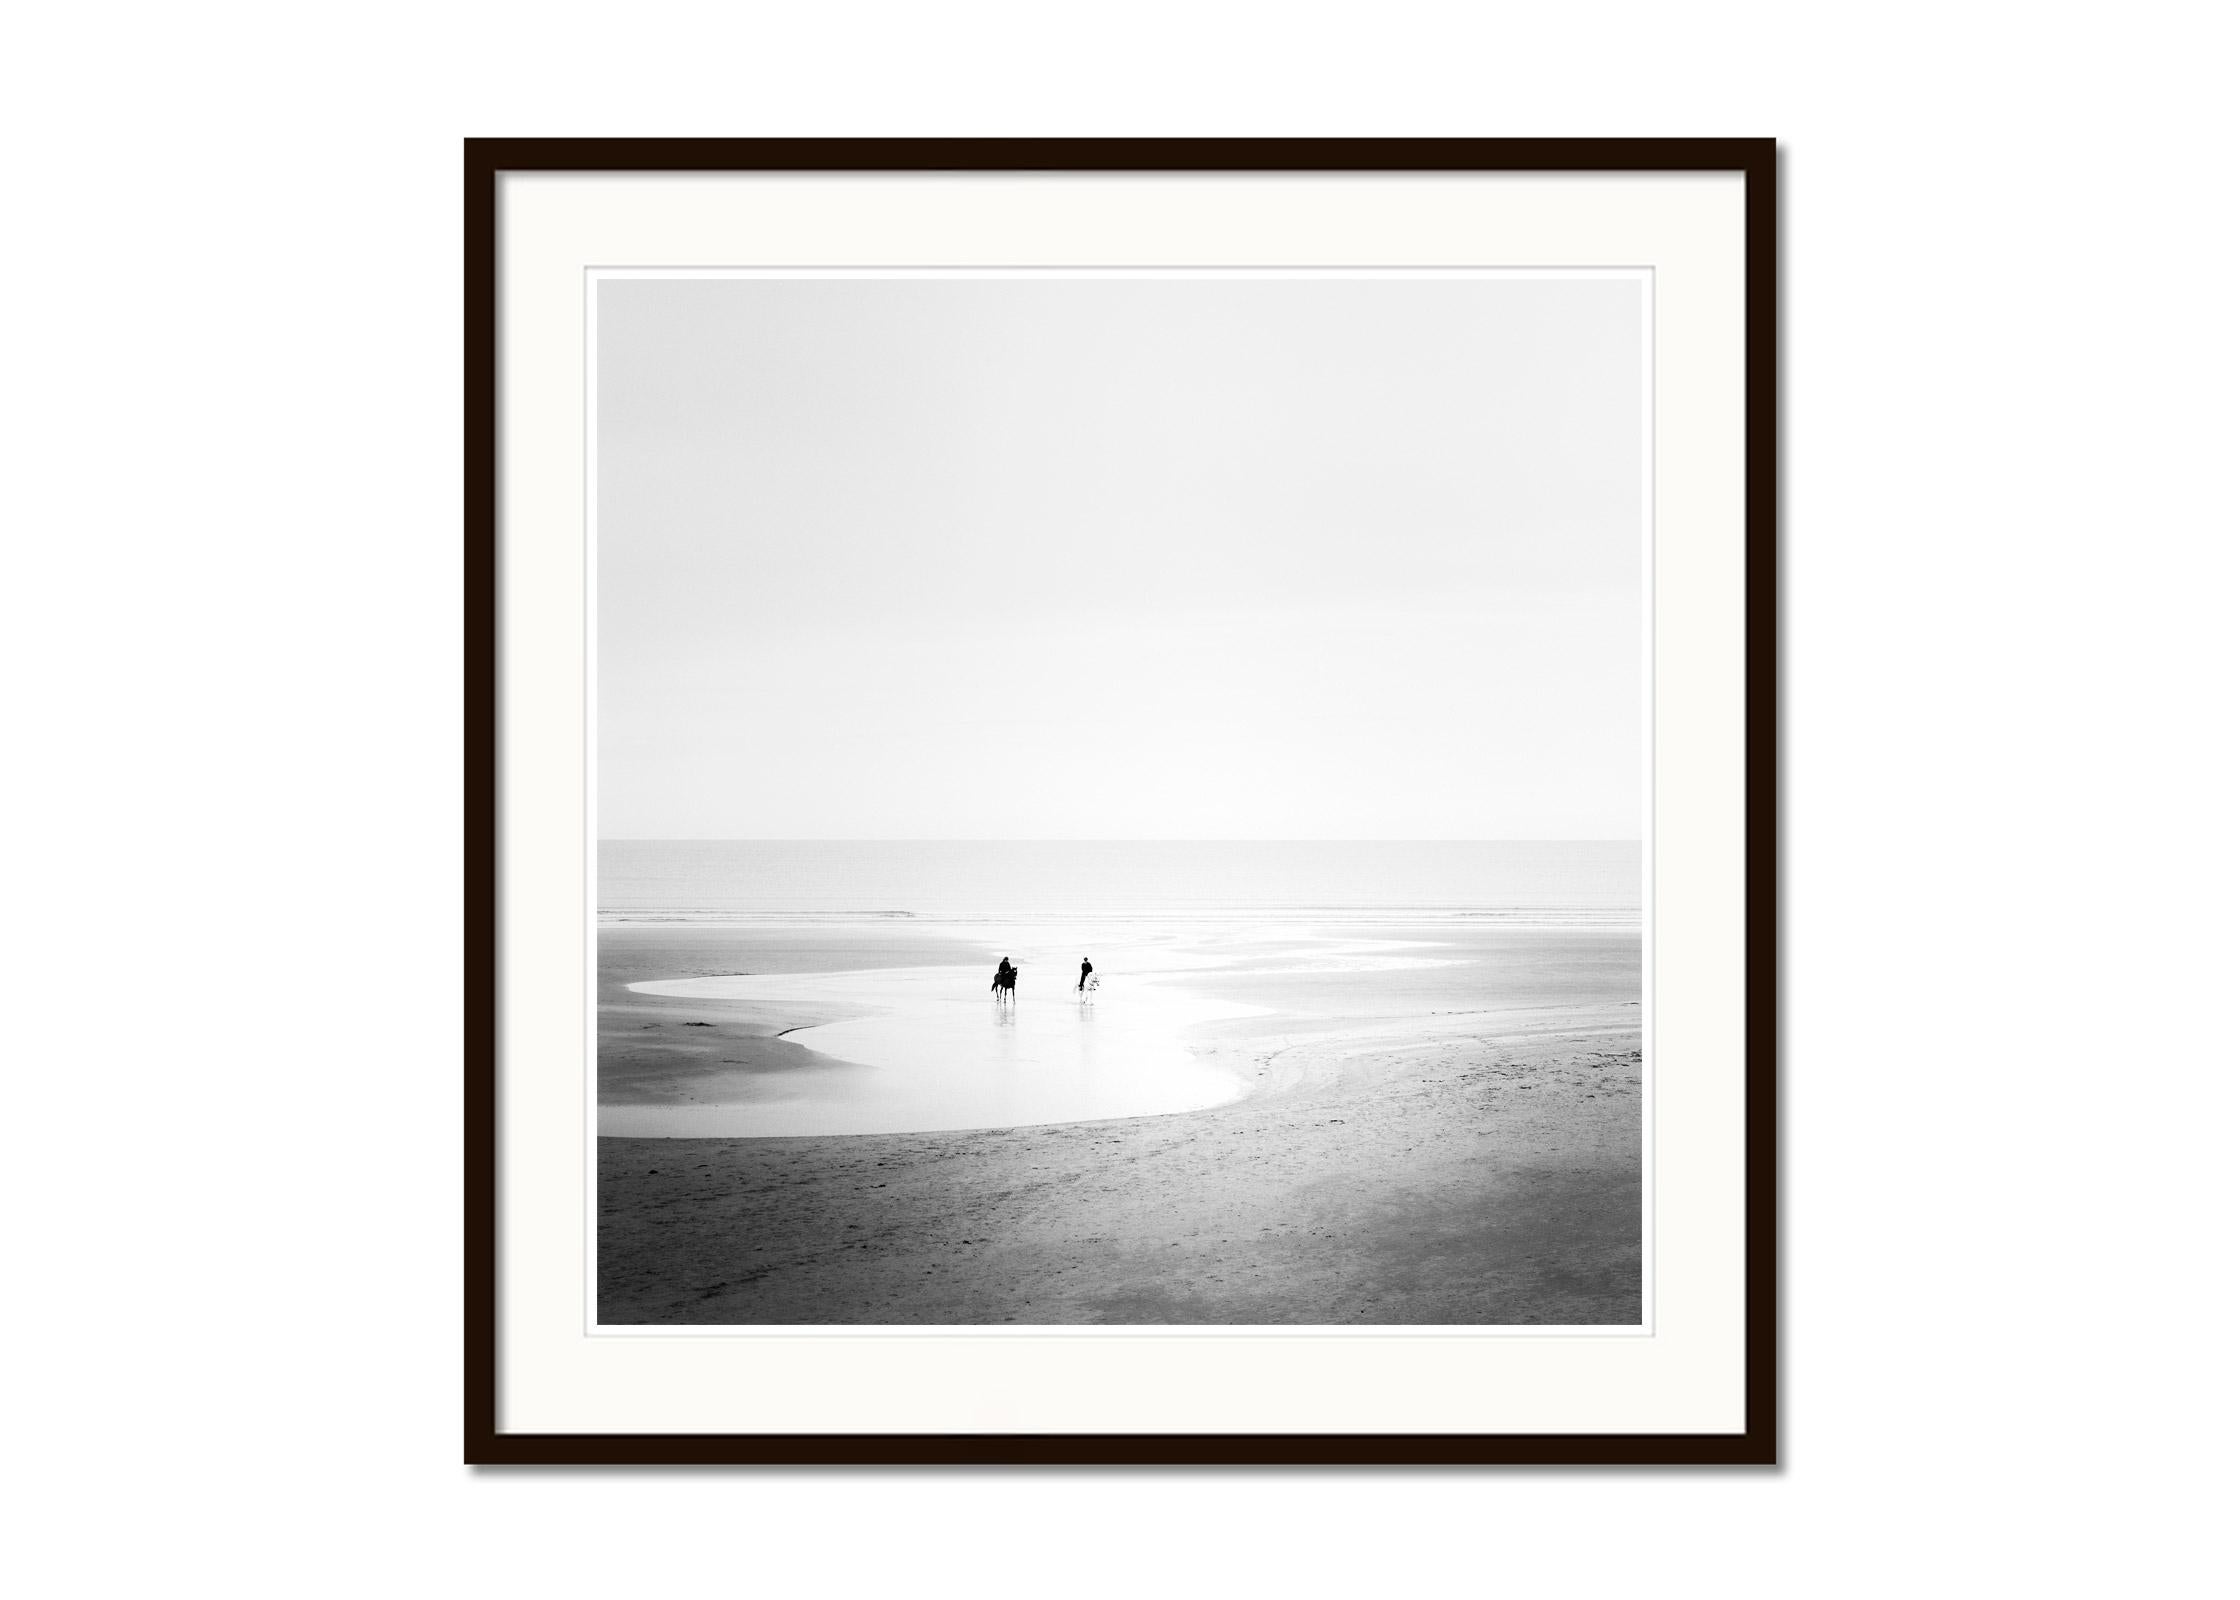 Sunday Morning, Horse Riding, Beach, Ireland, black and white art photography - Gray Black and White Photograph by Gerald Berghammer